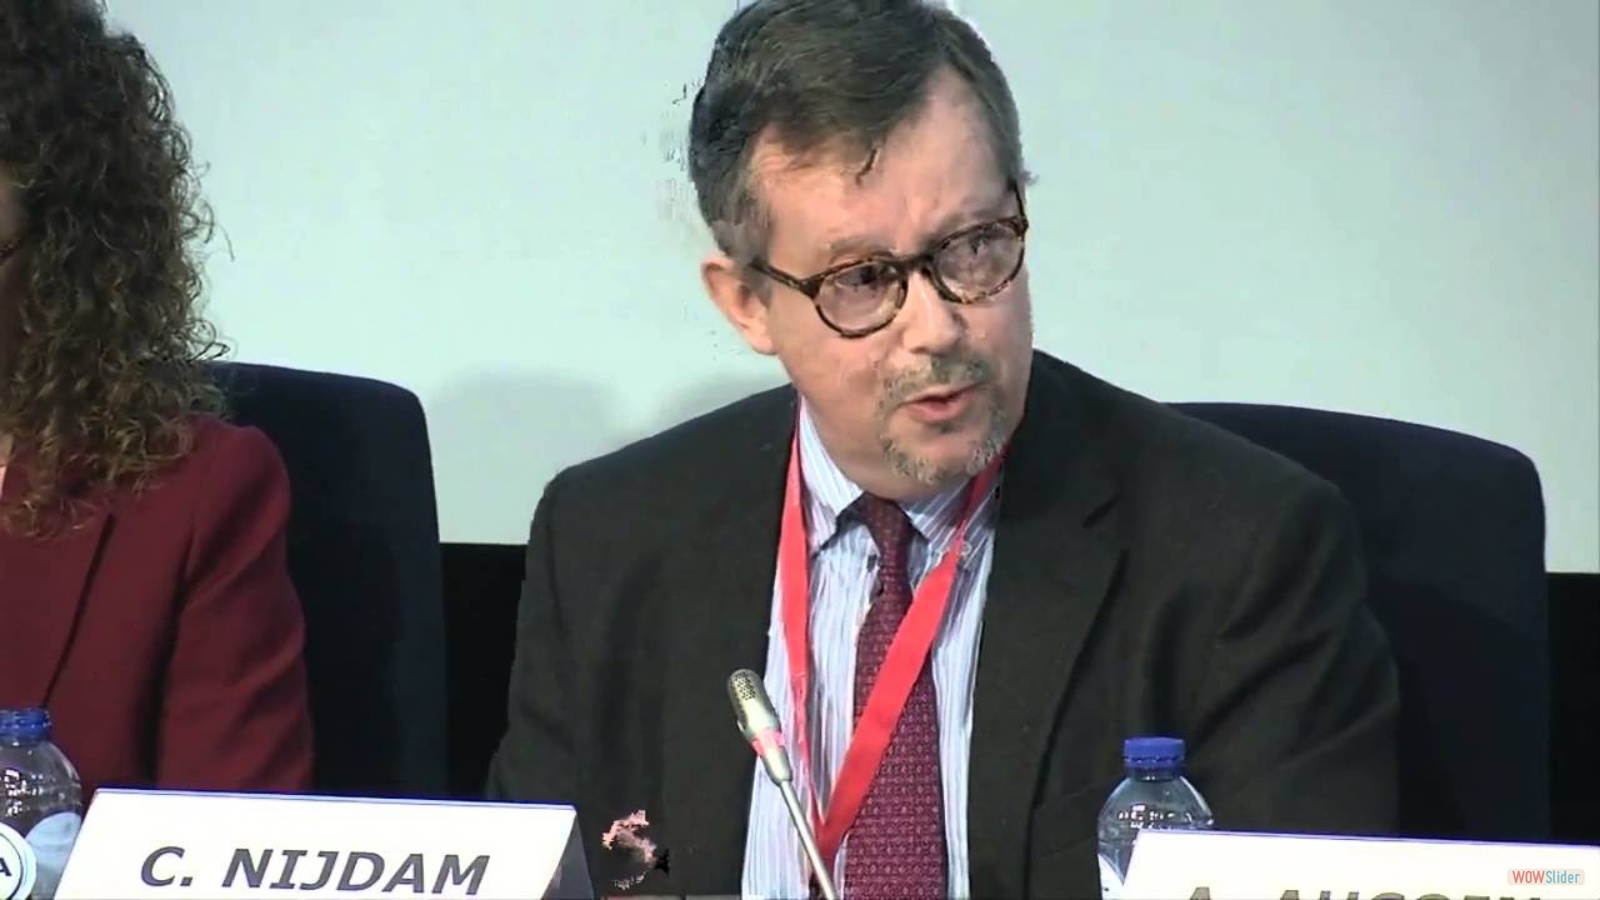 Speech at the public hearing on the Green paper on retail financial services, March 2016